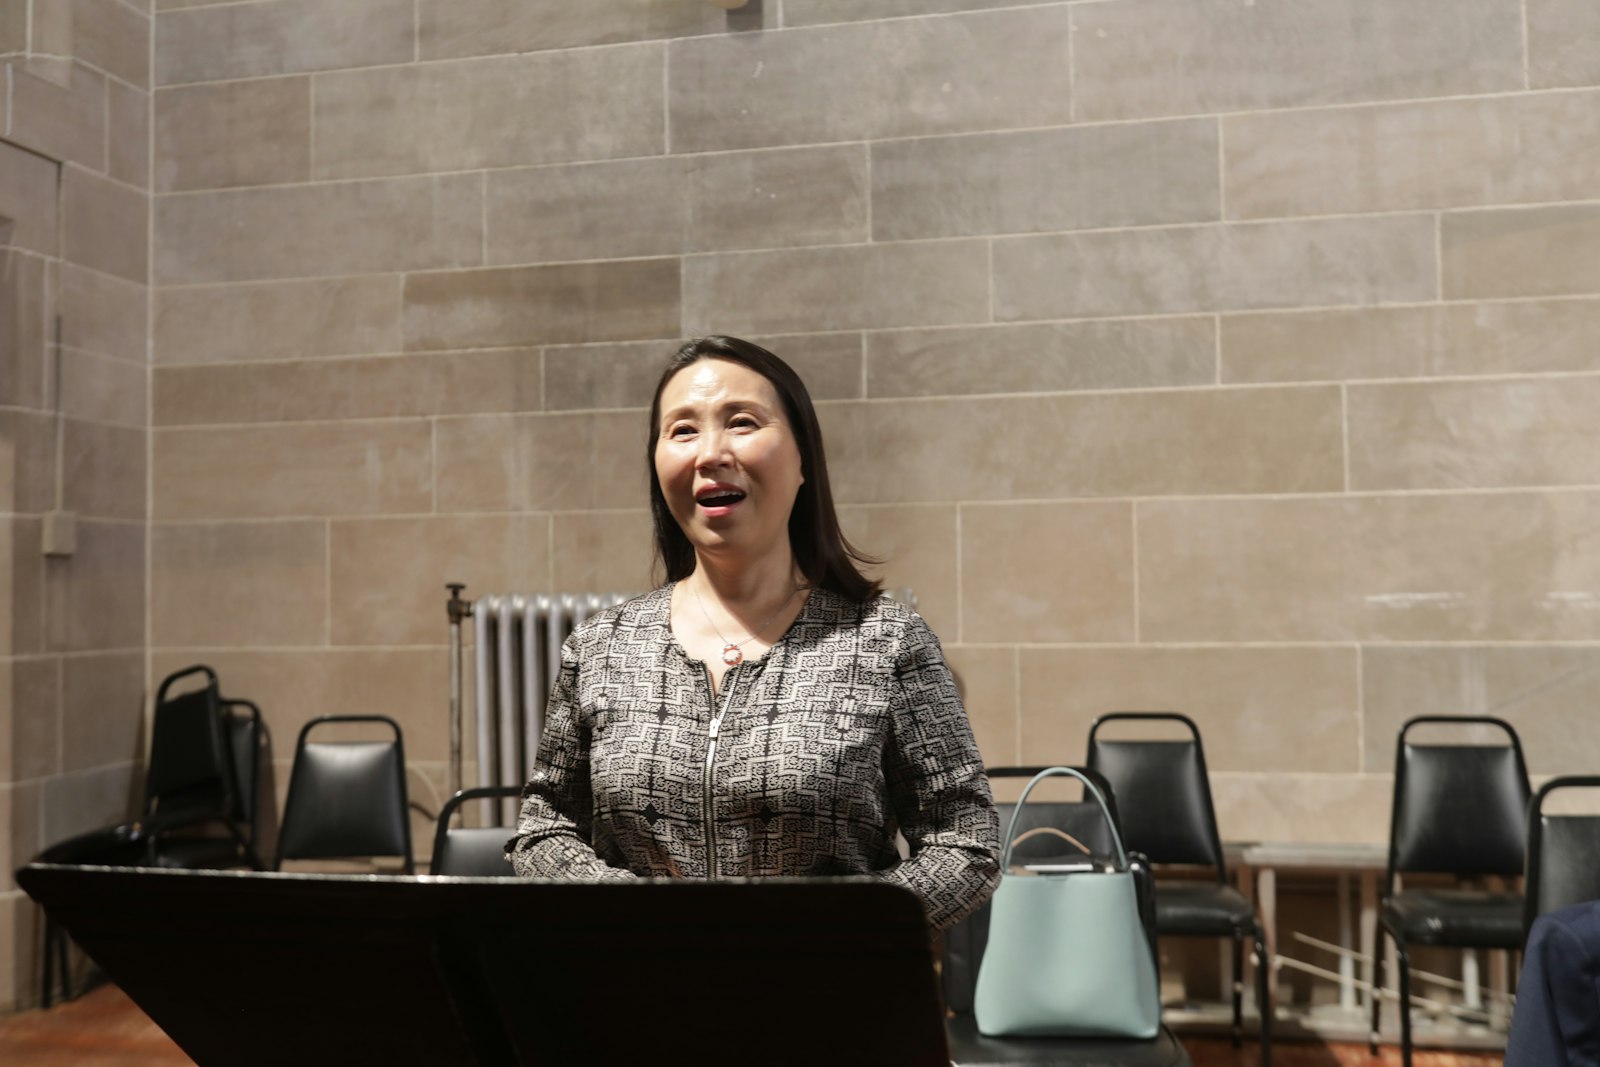 MeeAe Cecilia Nam is a member of the Cathedral of the Most Blessed Sacrament's choir and is used to singing at various Mass settings, as the cathedral is a sort of "second parish" to visitors from across the Archdiocese of Detroit.